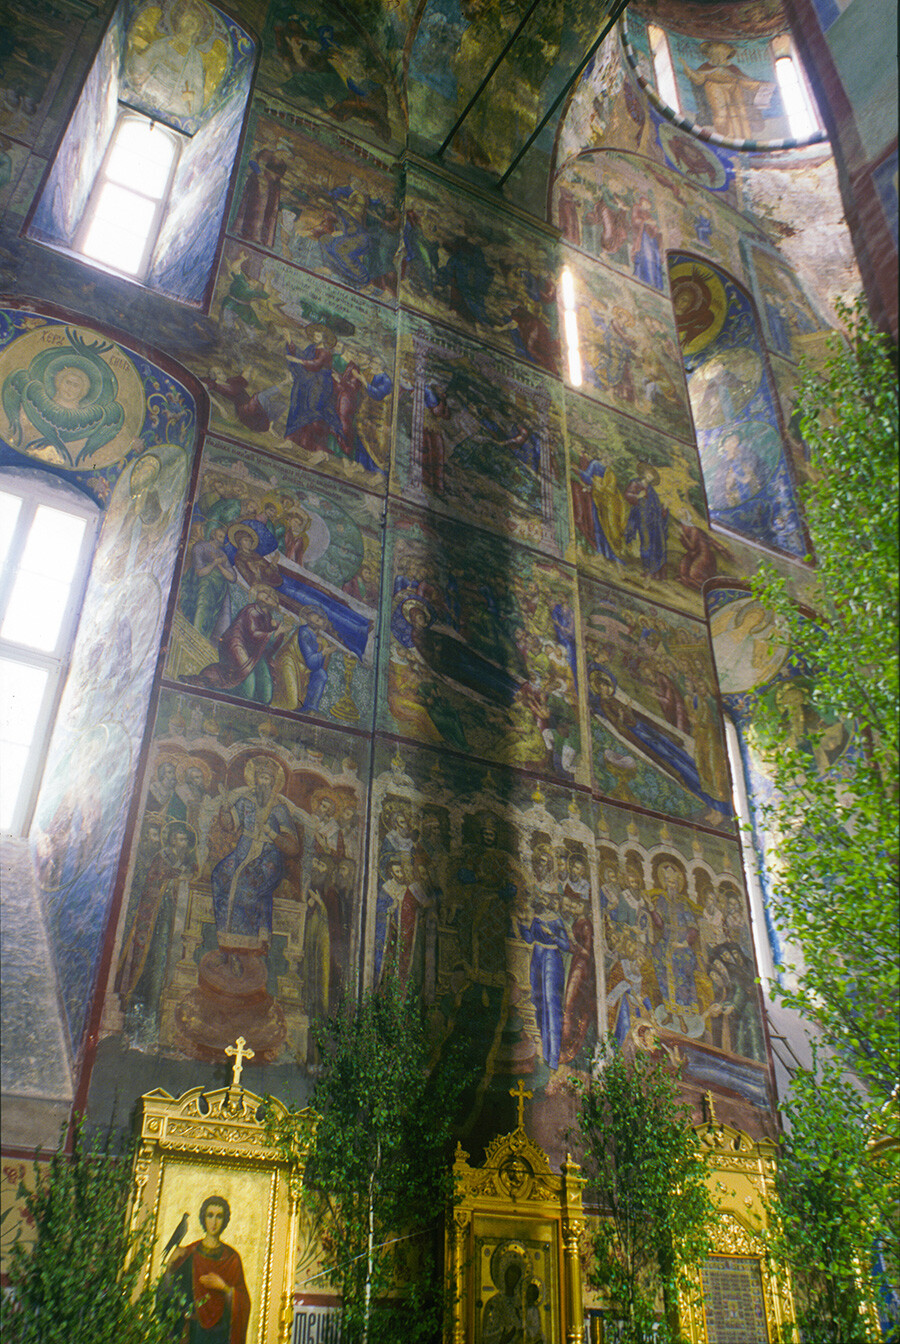  Trinity-St. Sergius Monastery. Dormition Cathedral. North wall with frescoes depicting Eucumenical Councils (bottom row), motifs from Akathist hymn to Virgin, & scenes from life of Christ. May 29, 1999